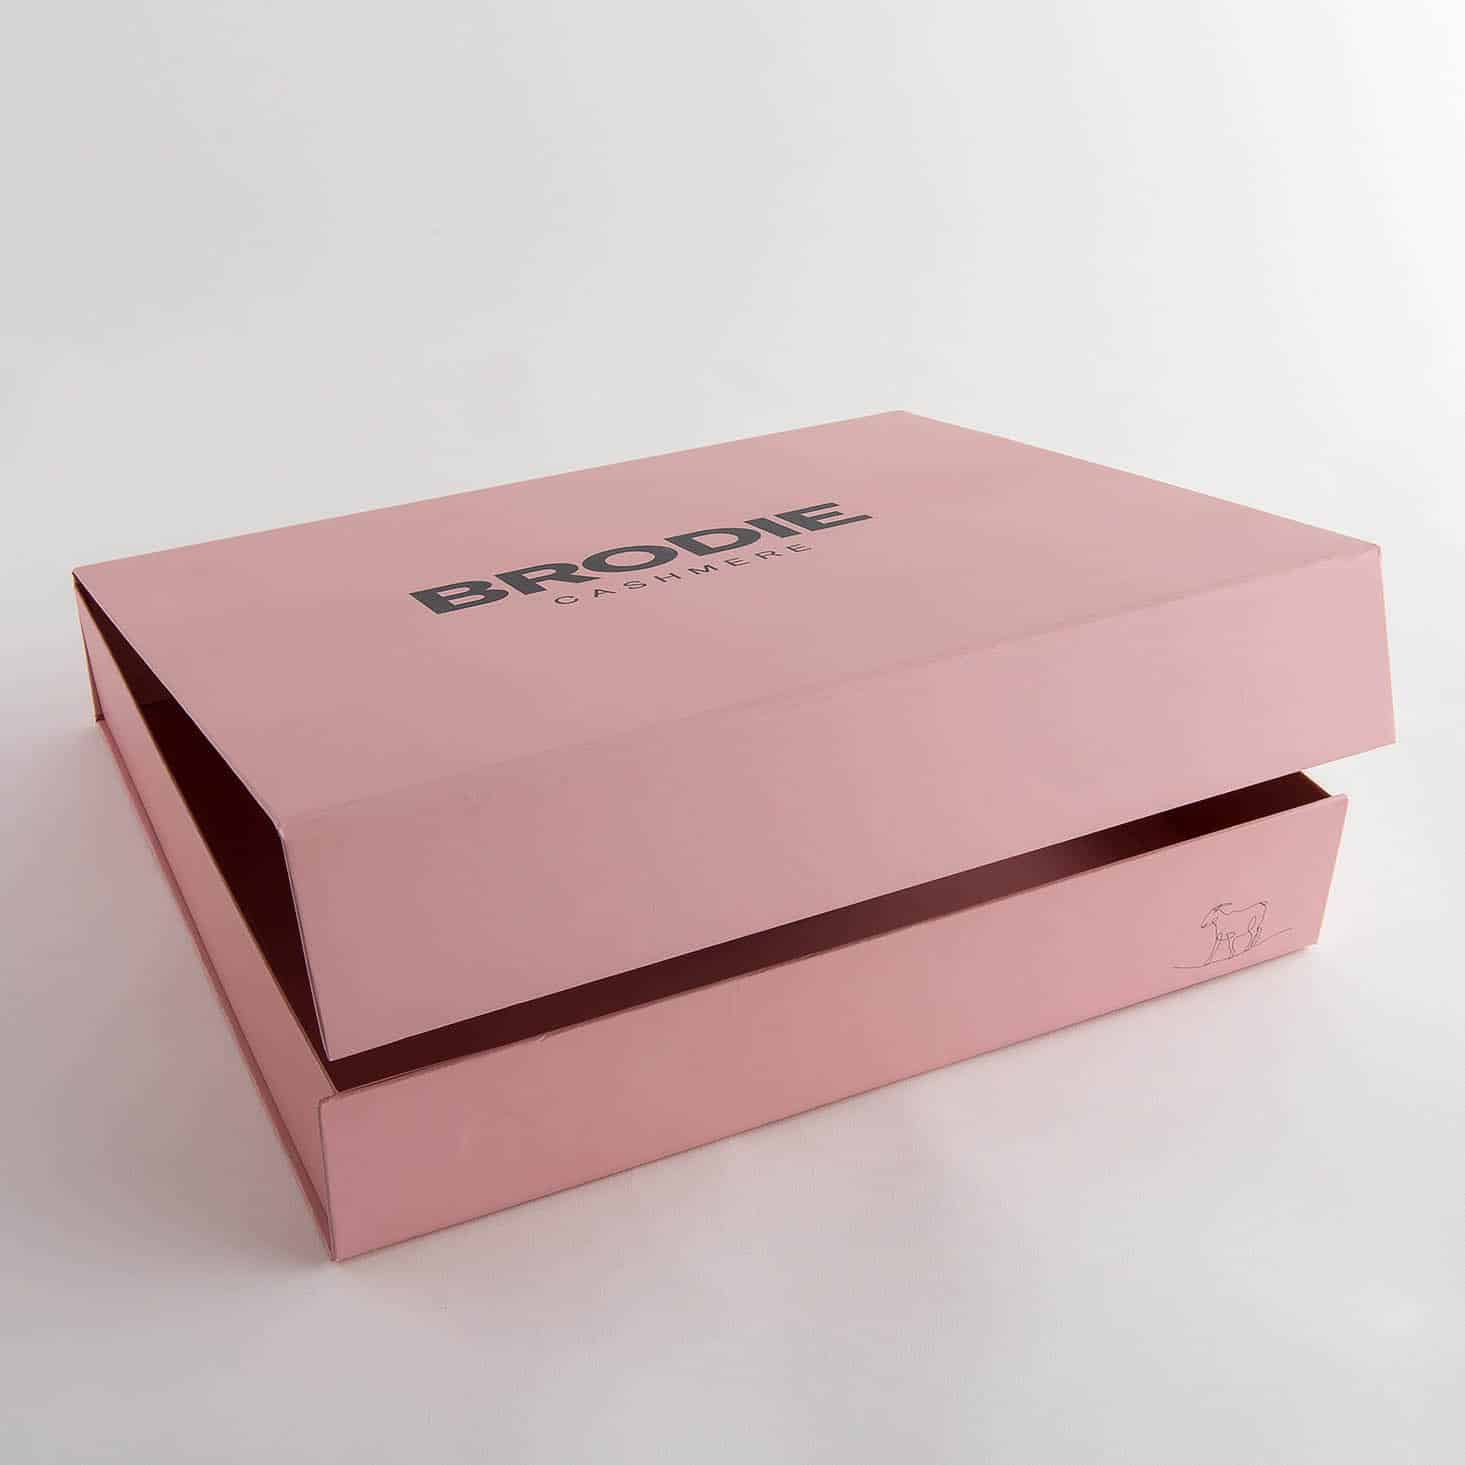 Branded Mailing boxes